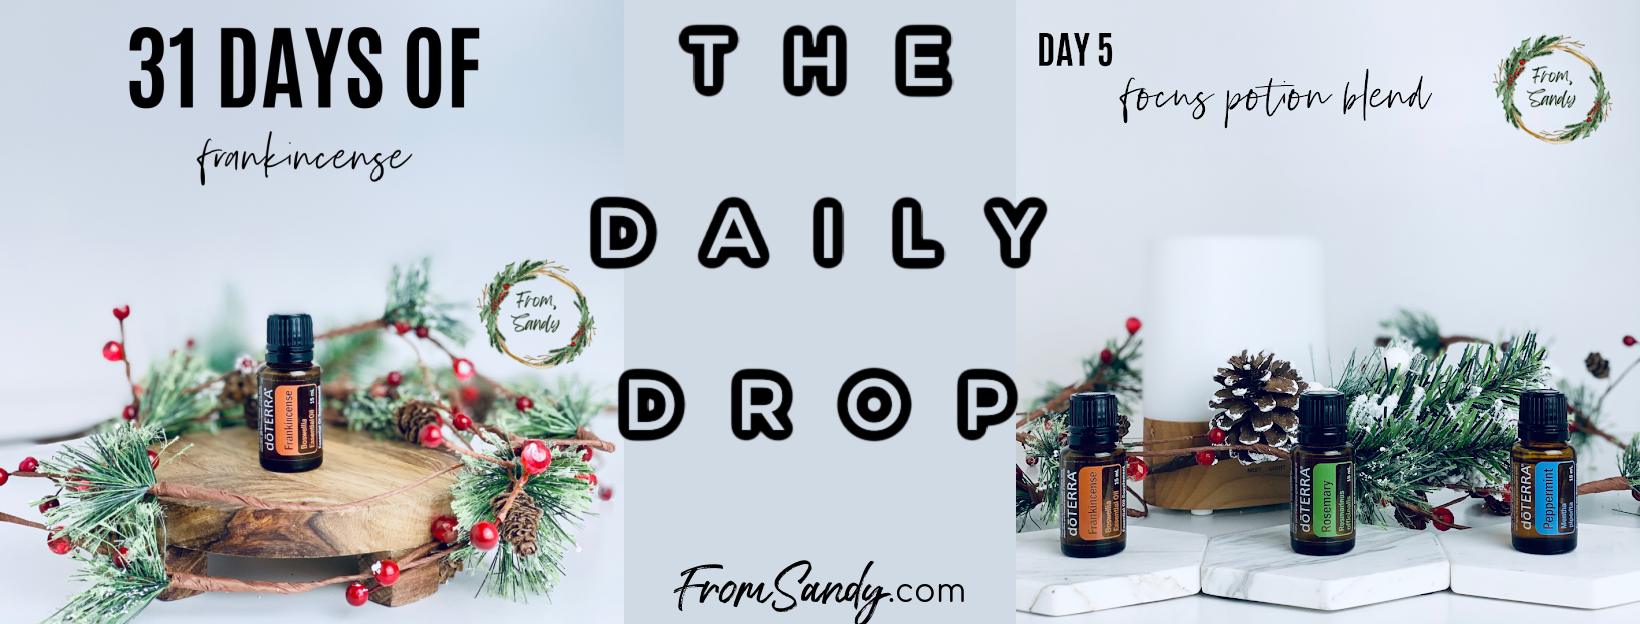 Focus Potion Blend (31 Days of Frankincense: Day 5), From Sandy